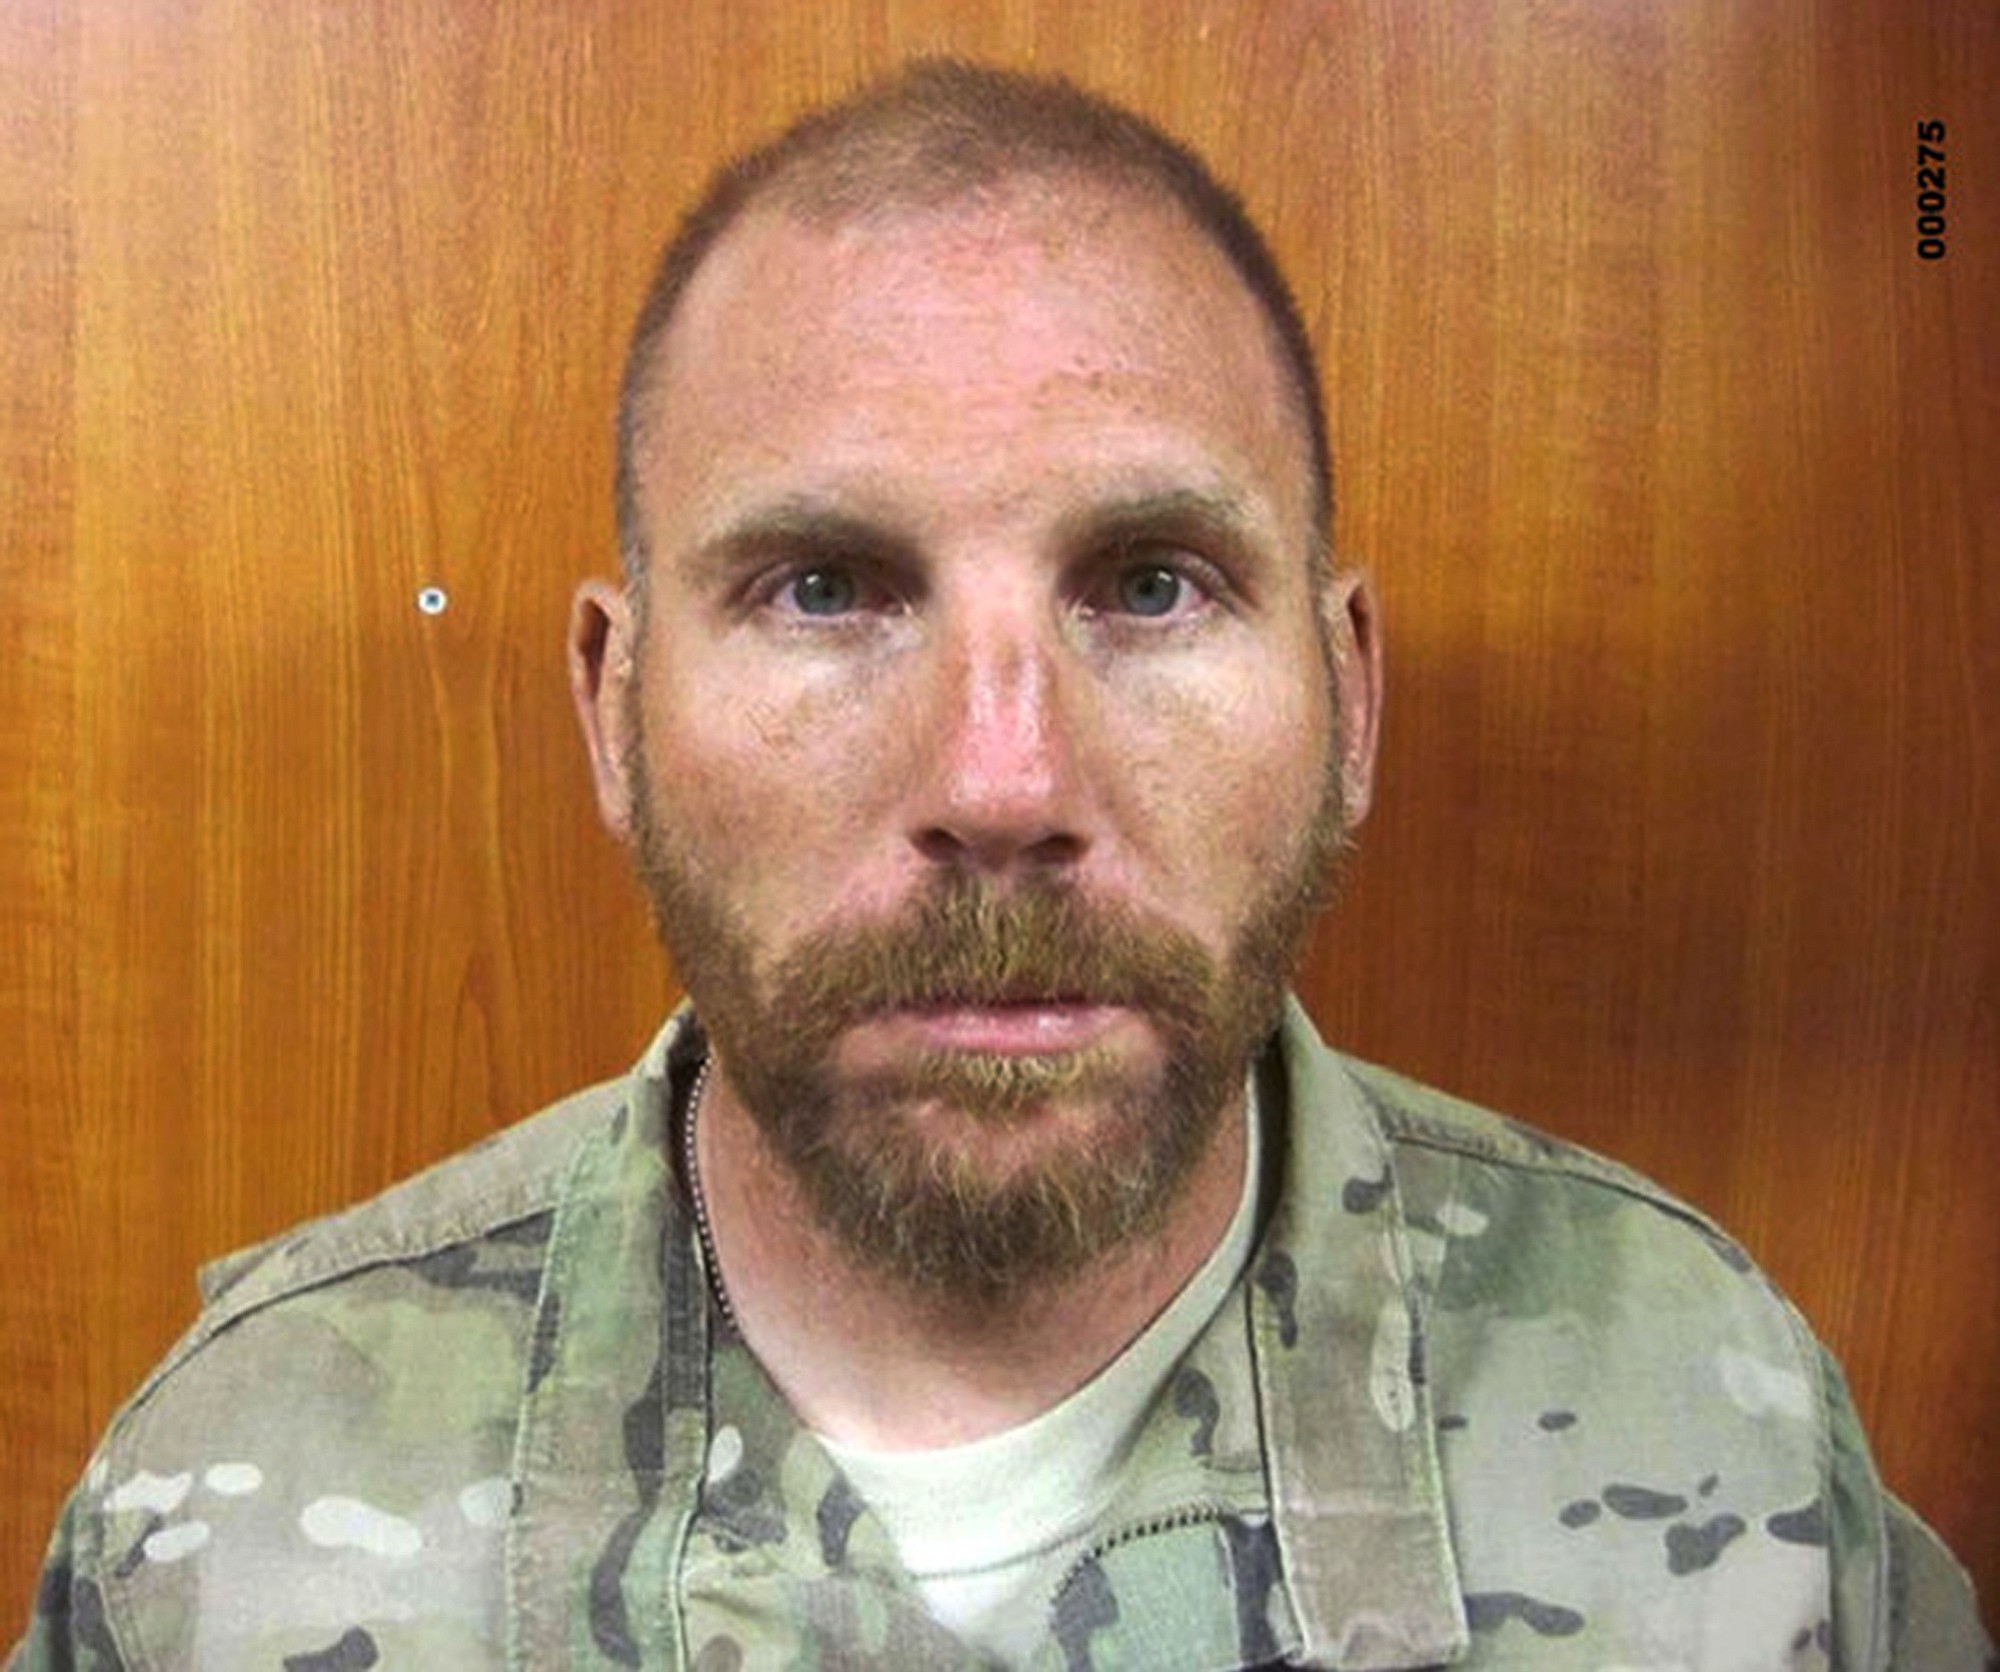 This U.S. Army photo, provided by the Tacoma News-Tribune, shows Staff Sgt. Robert Bales in March, 2012. The Army's caption describes it as being taken the night of the attacks.